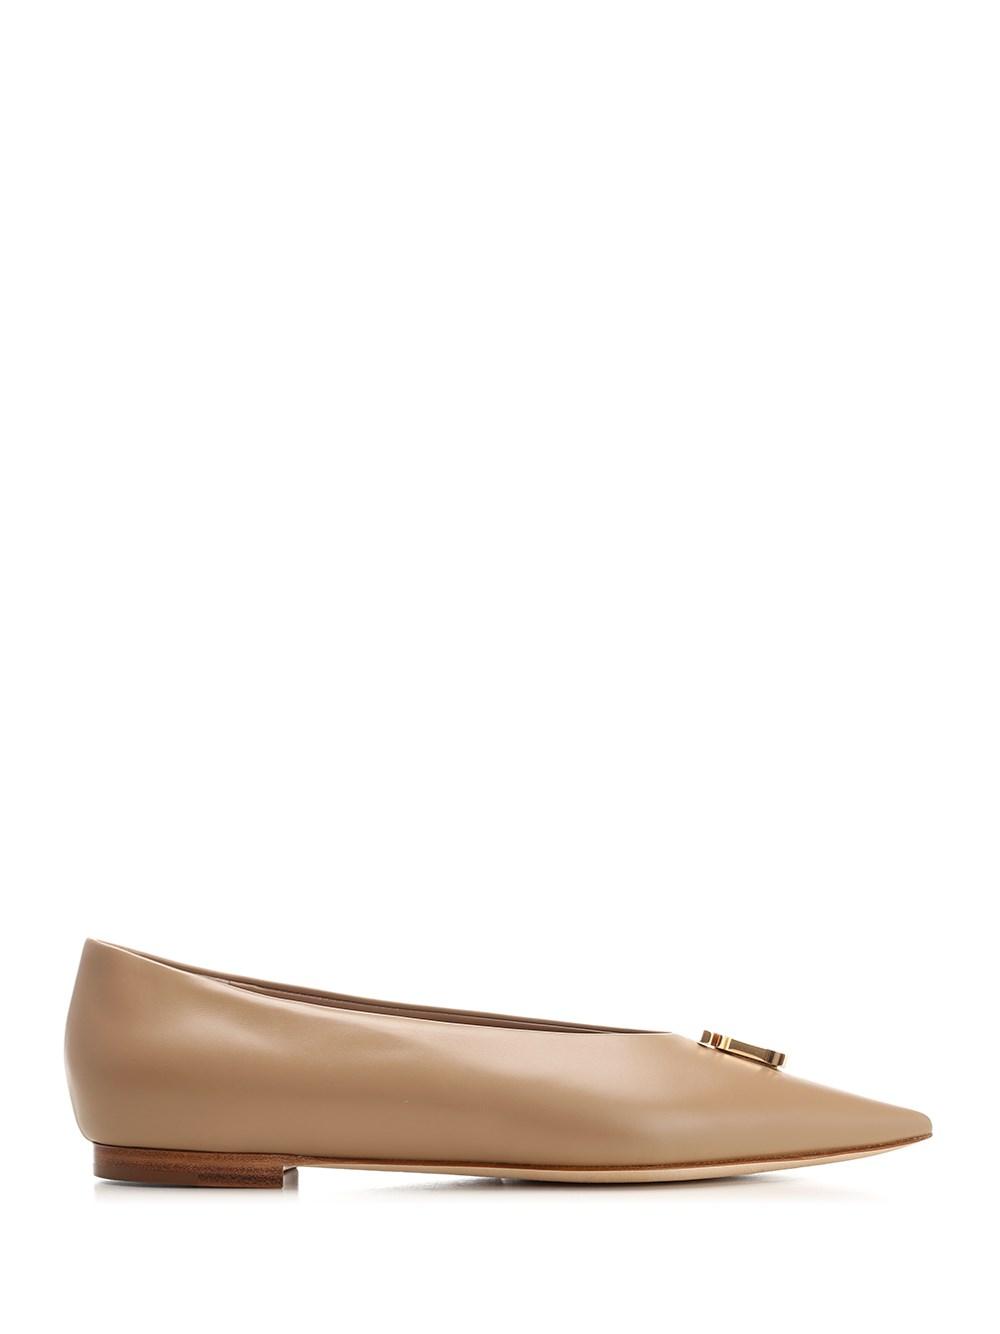 Burberry Pointed Toe Ballerinas in Natural | Lyst